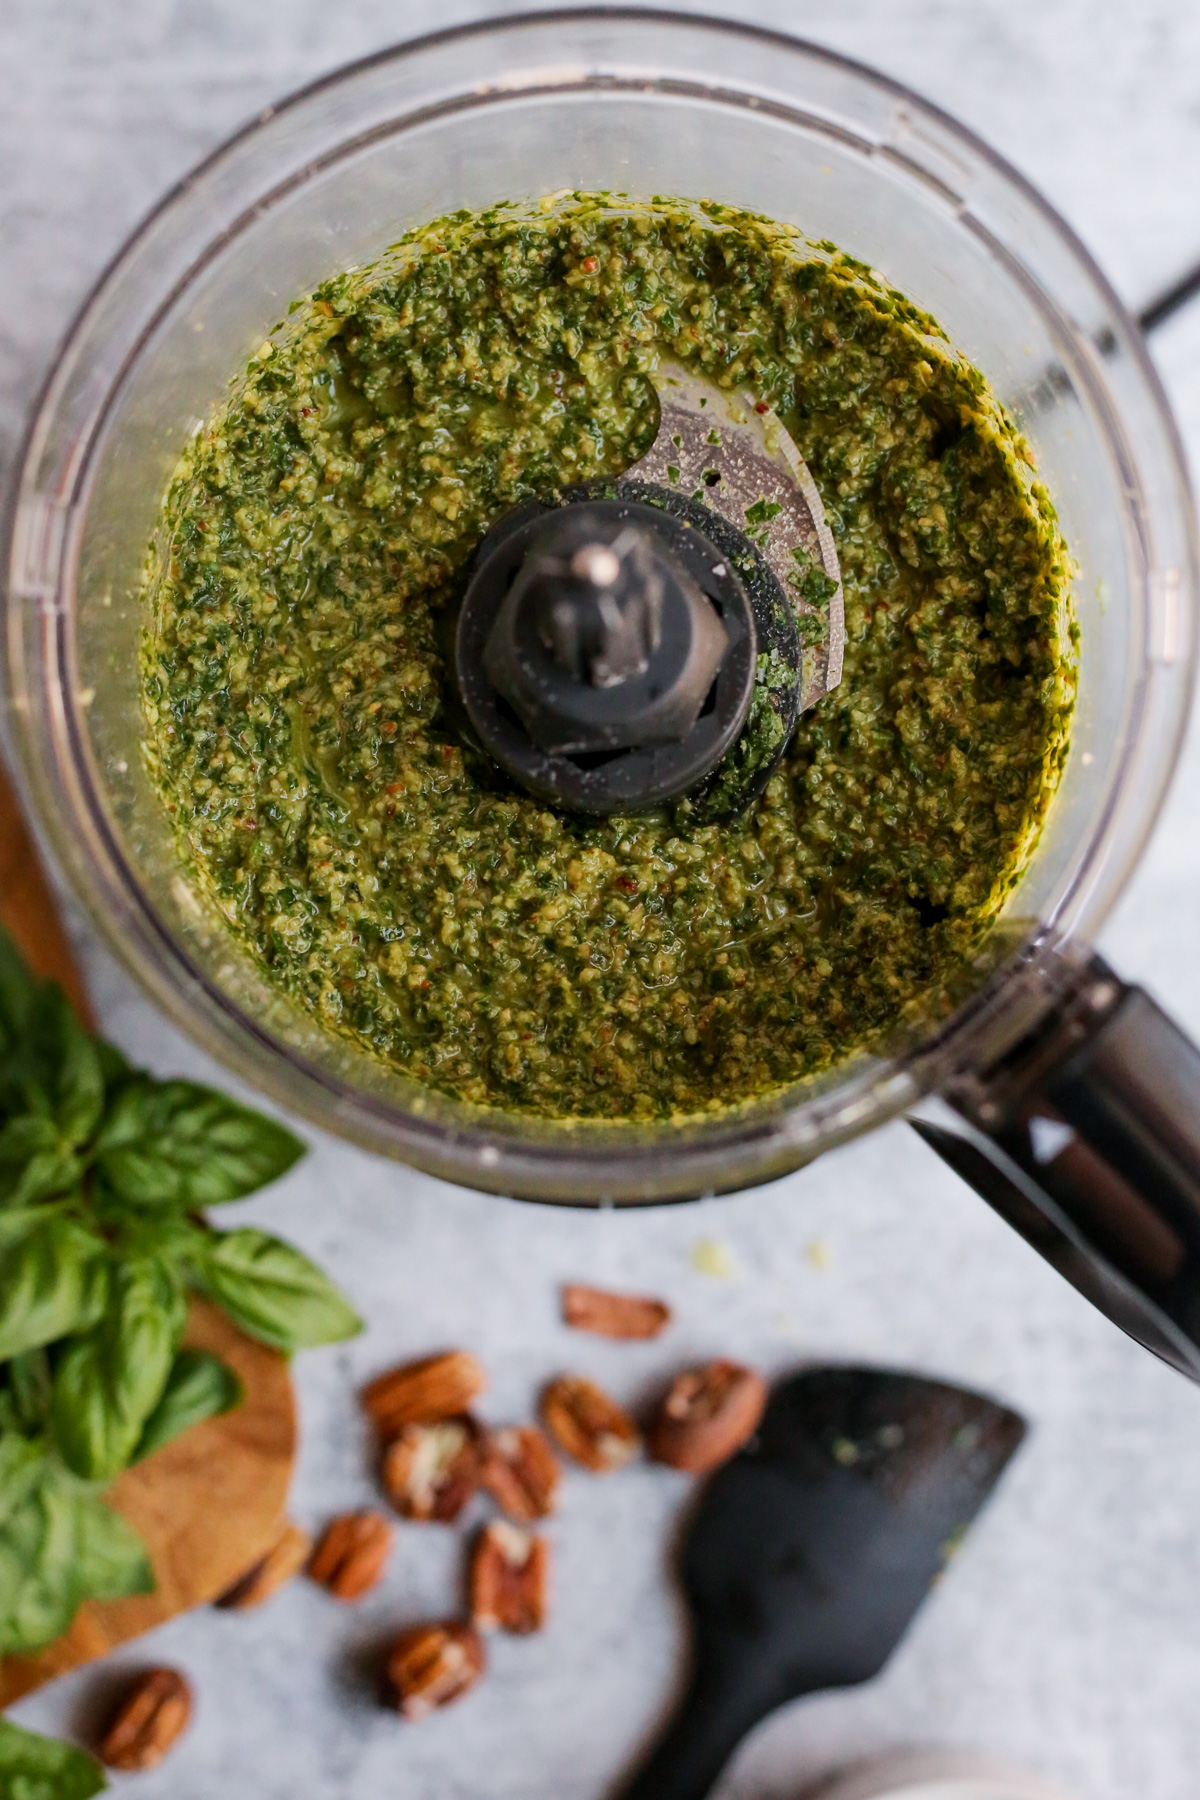 Overhead view of a fully blended batch of pecan pesto without pine nuts in the bowl of a food processor, set up on a kitchen countertop with the lid removed to show the chunky consistency after the olive oil is added